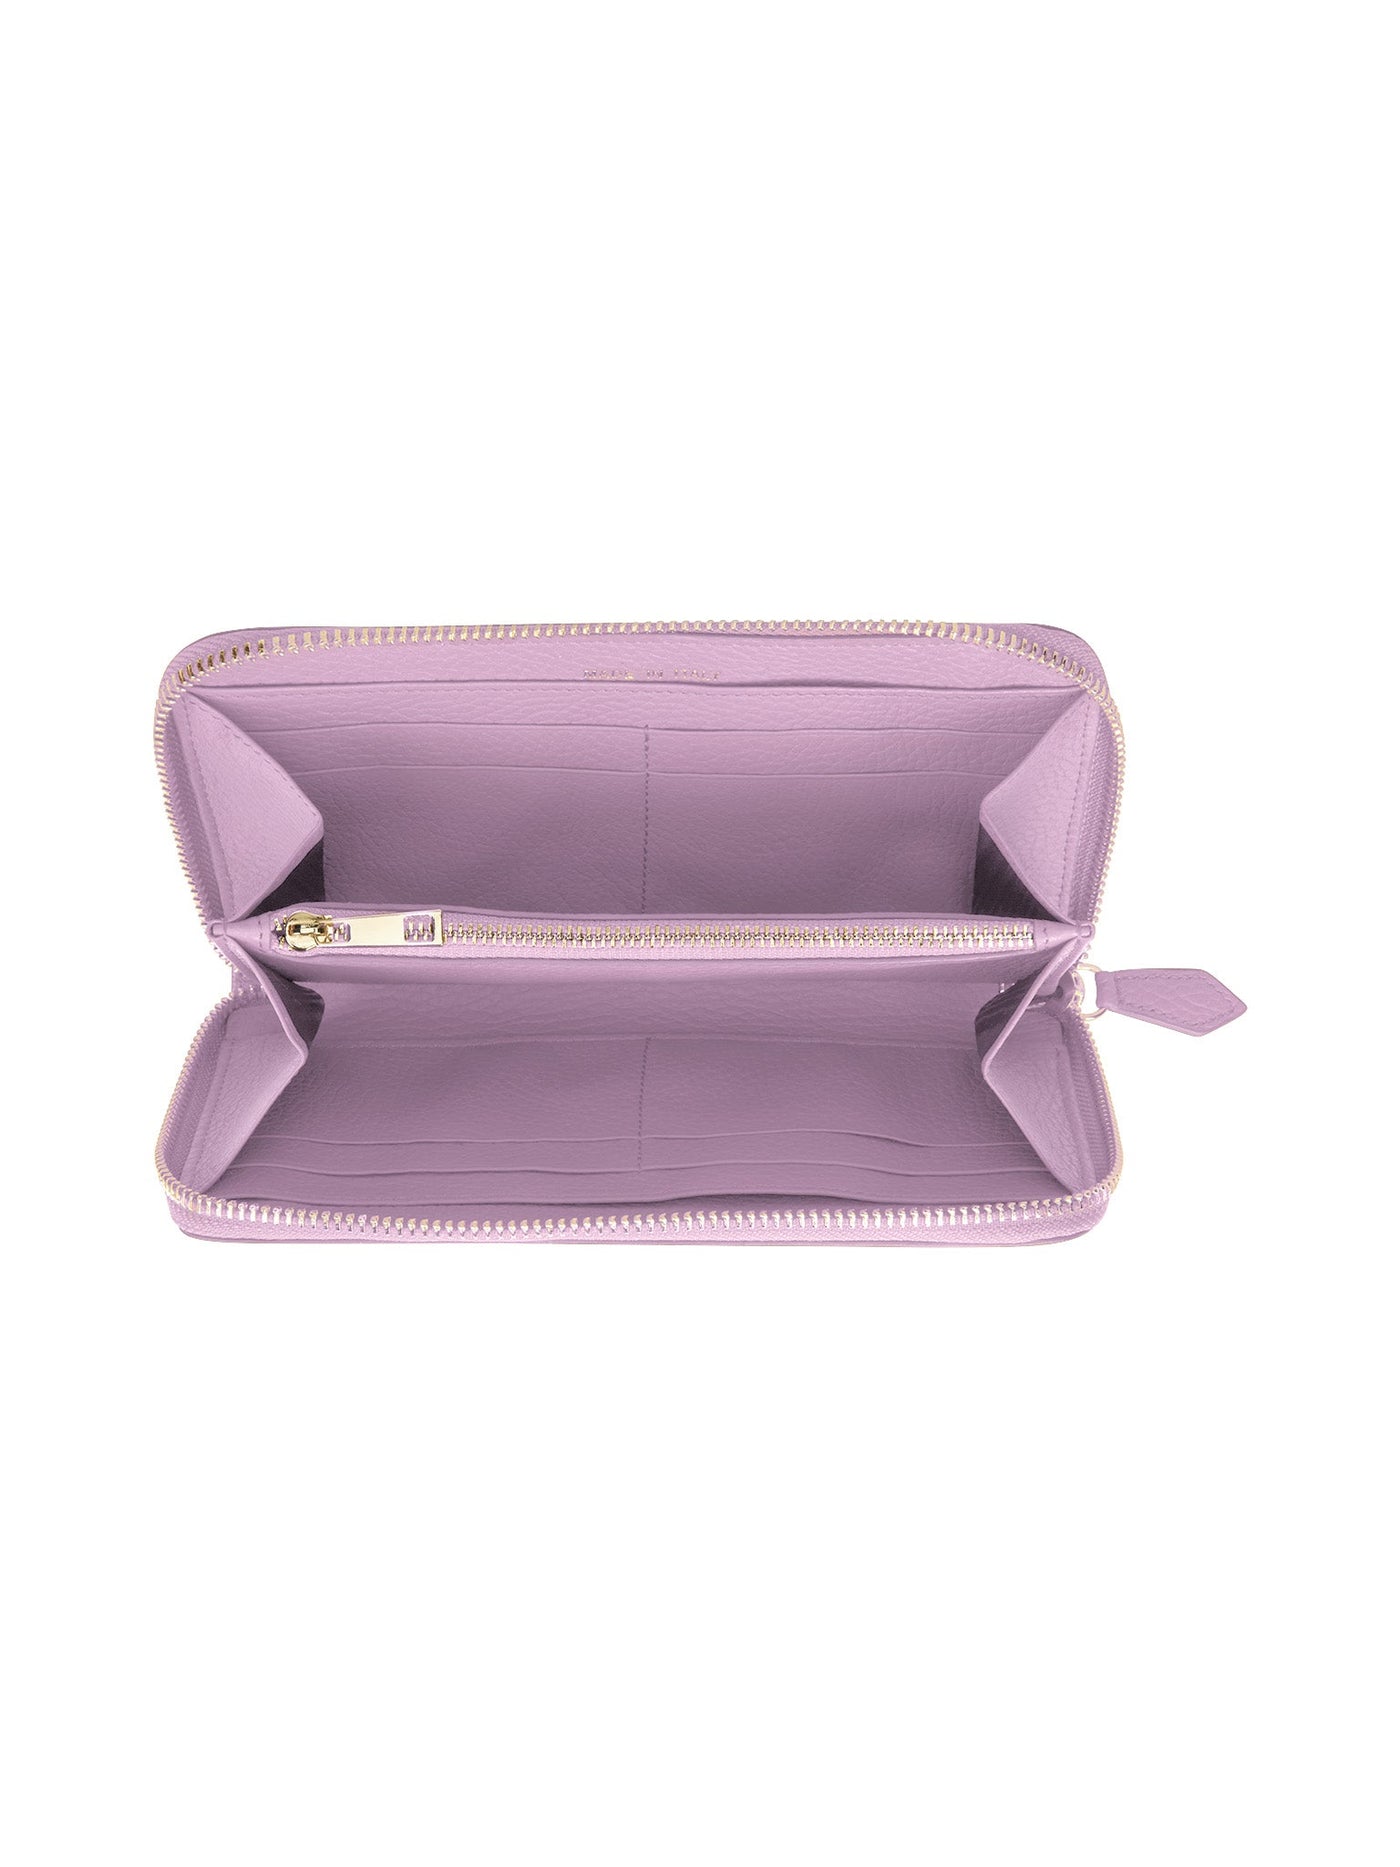 TB Zipwallet Stampato - Lilac